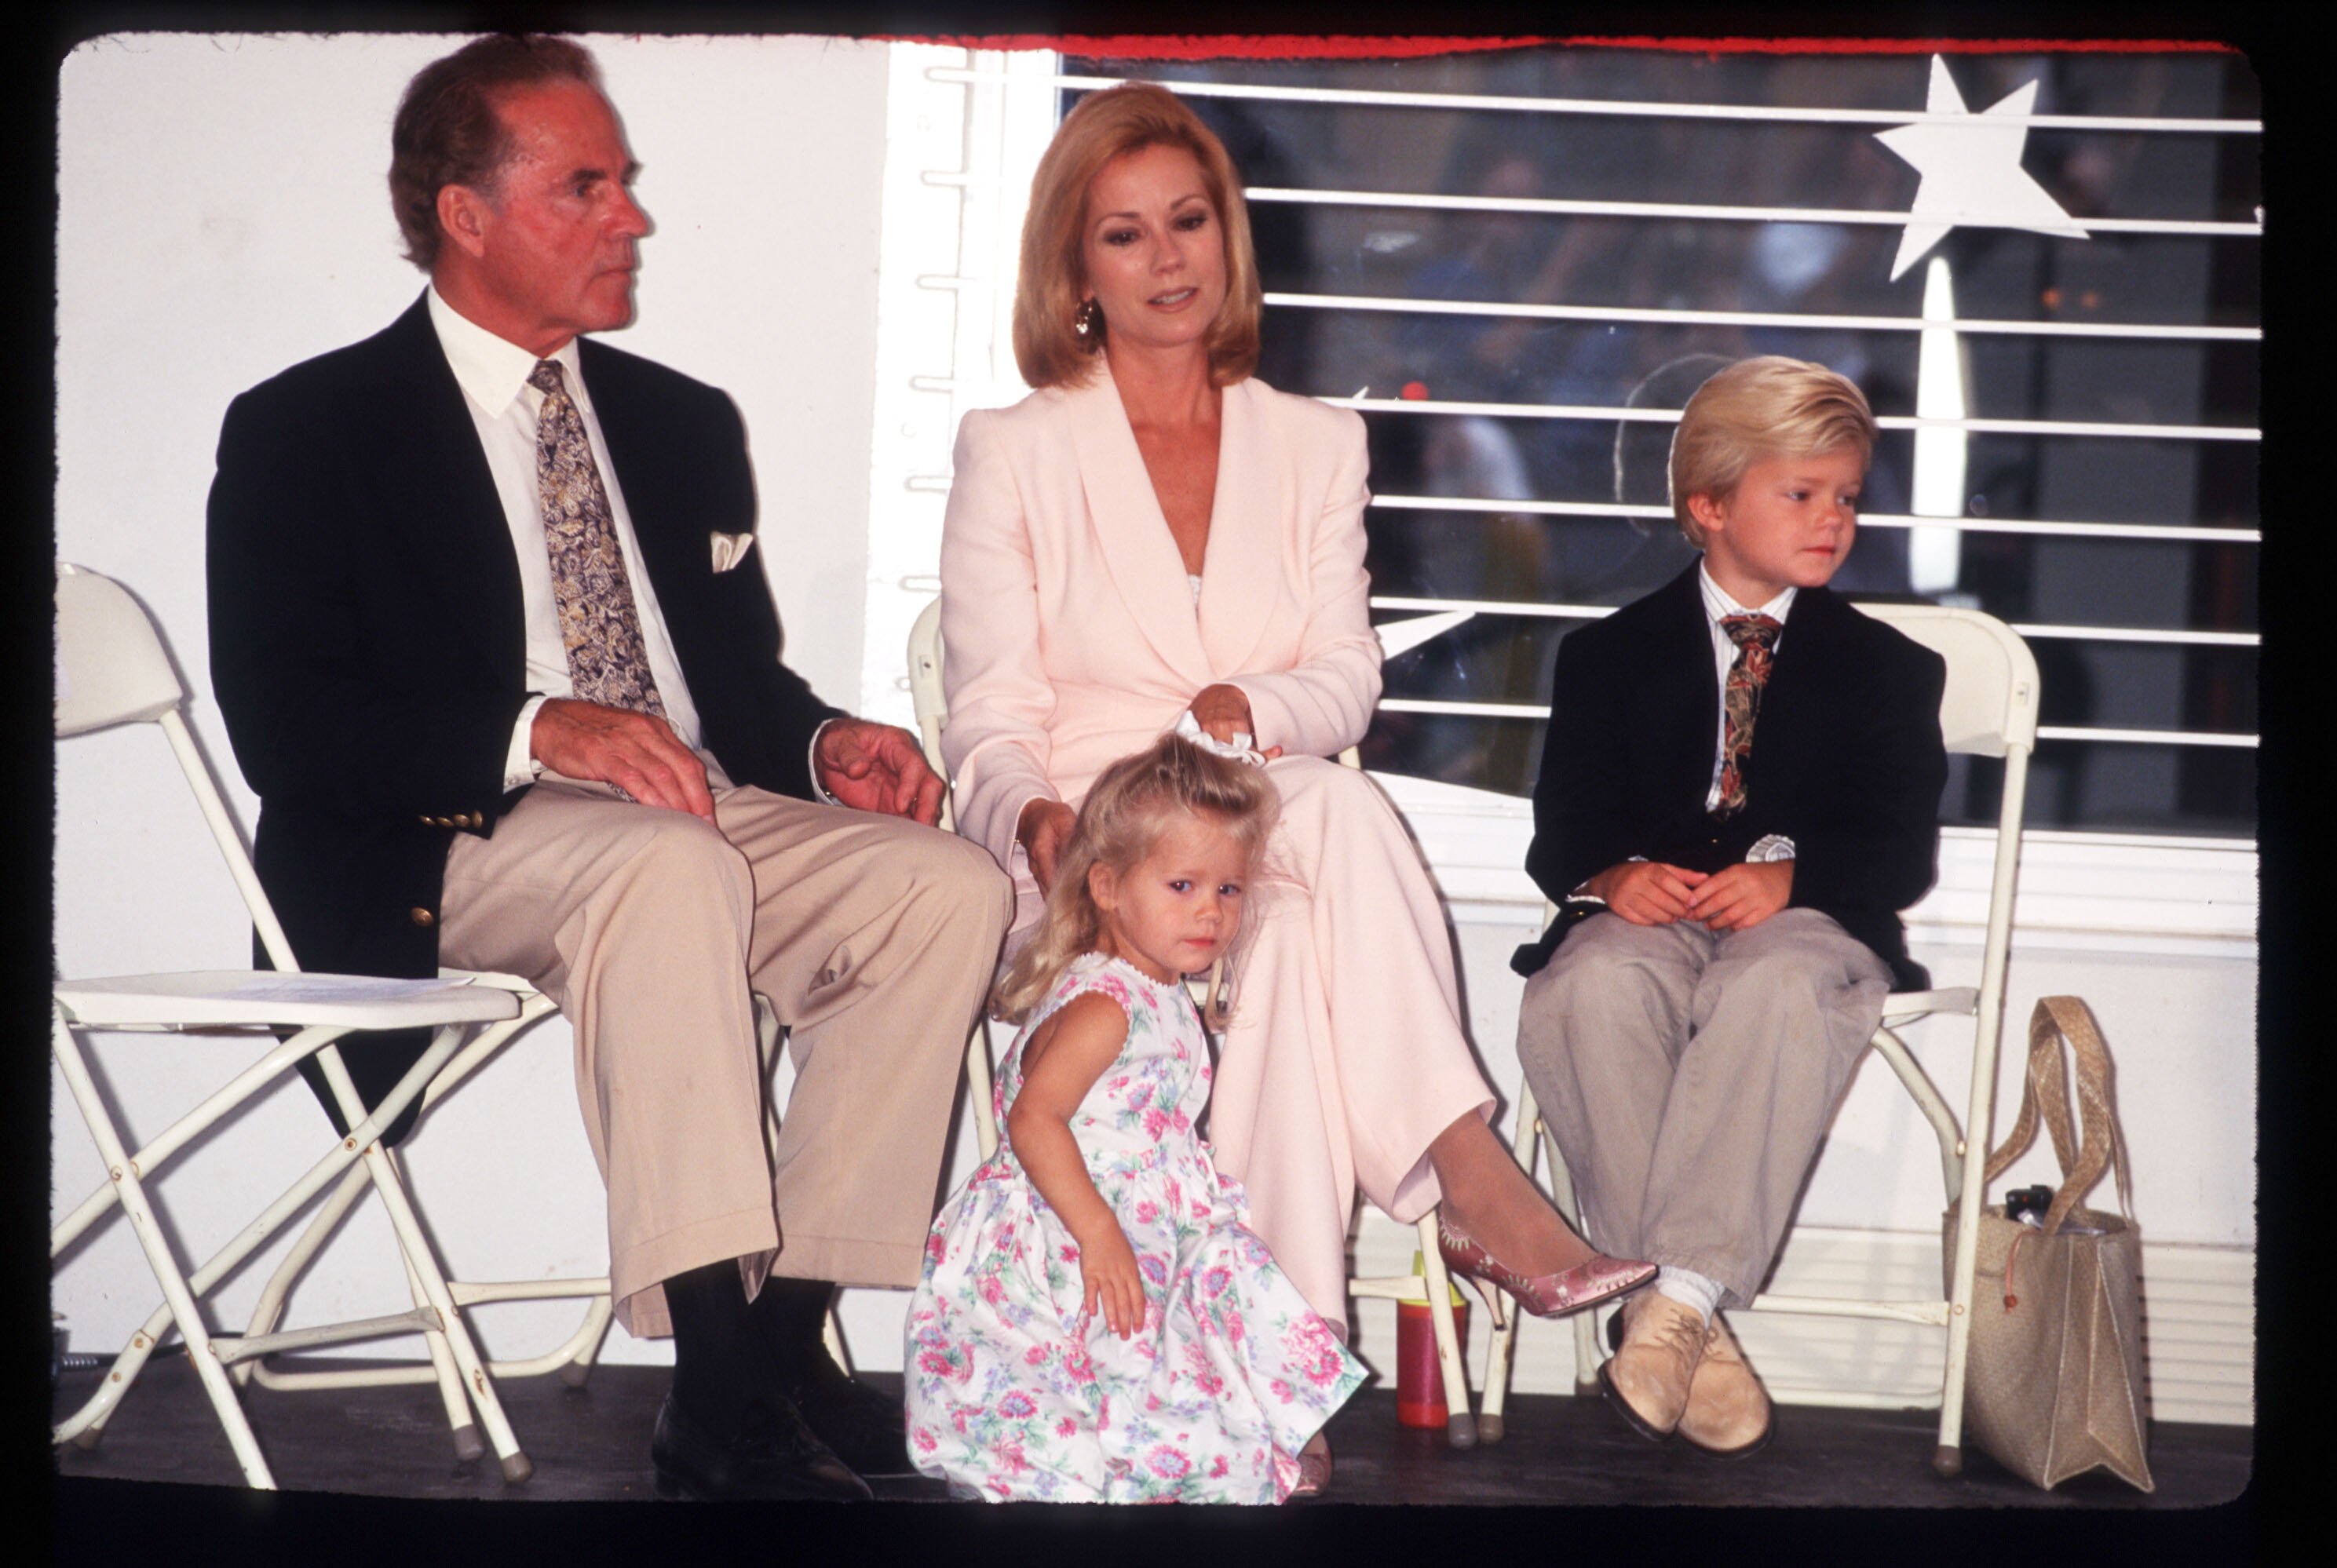 Frank and Kathie Lee Gifford with their children Cassidy and Cody on June 10, 1996 in New York City | Source: Getty Images